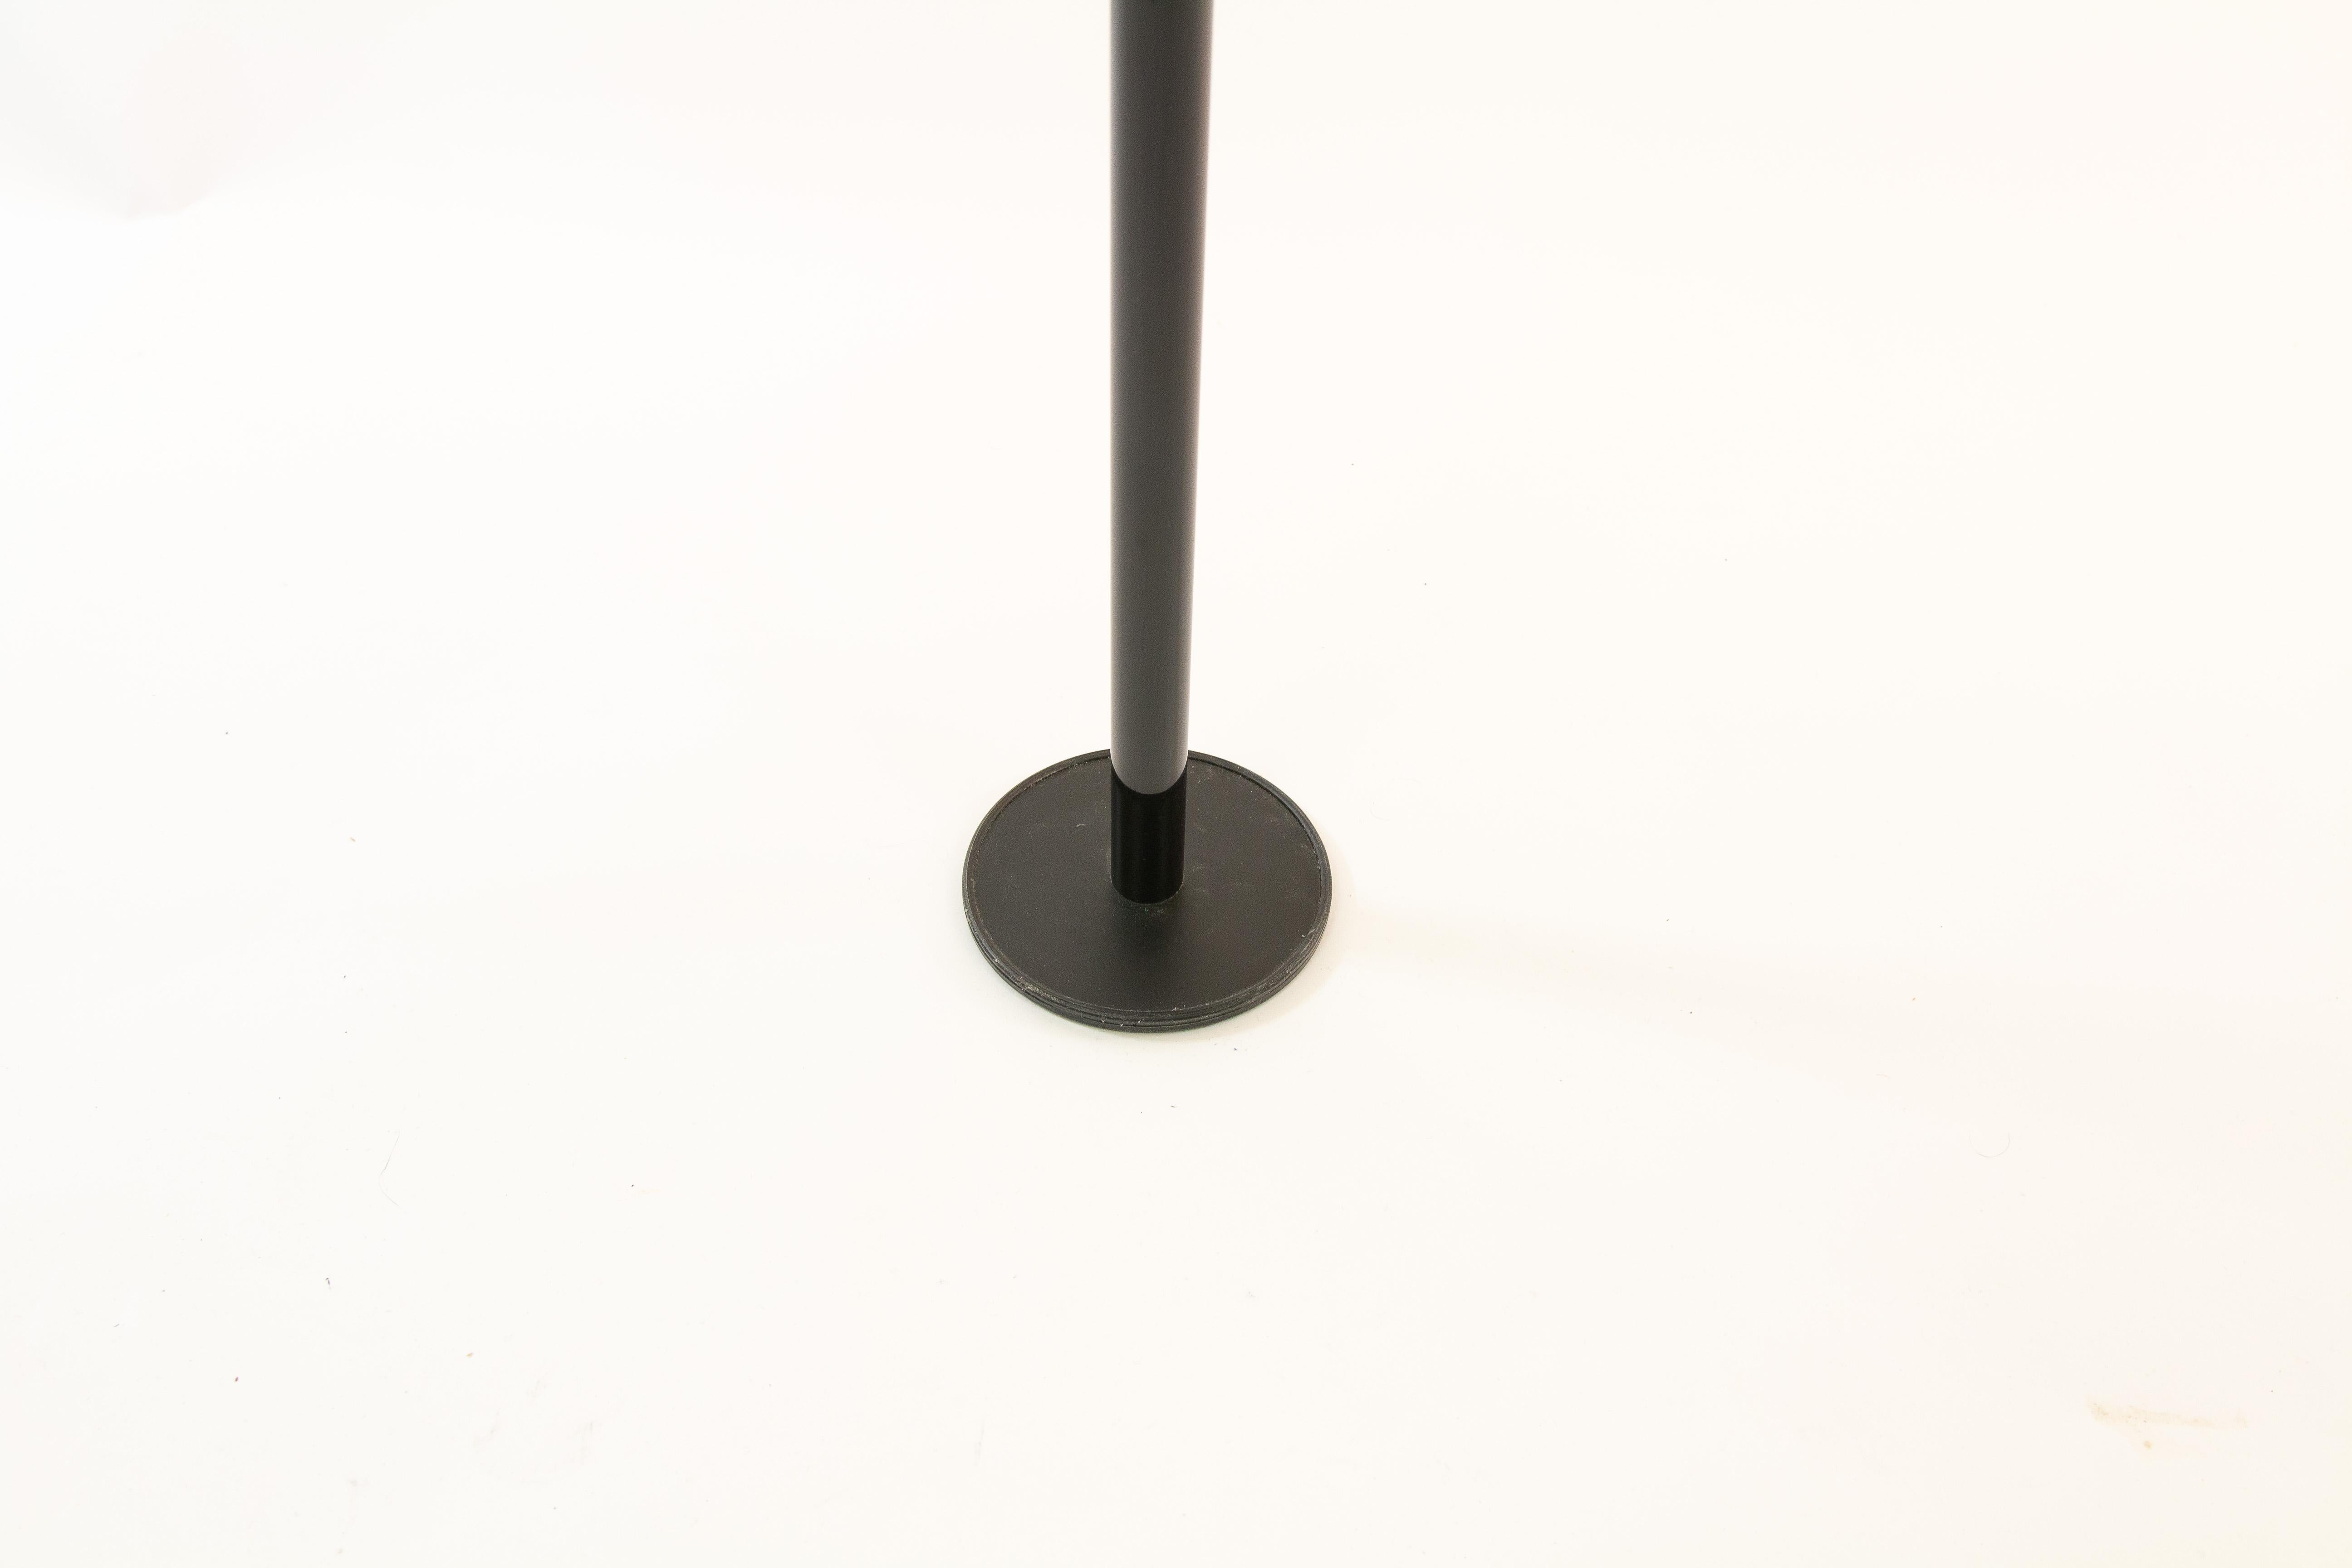 Anodized Bigo Floor to Ceiling Lamp by S.T. Valenti for Valenti, 1980s